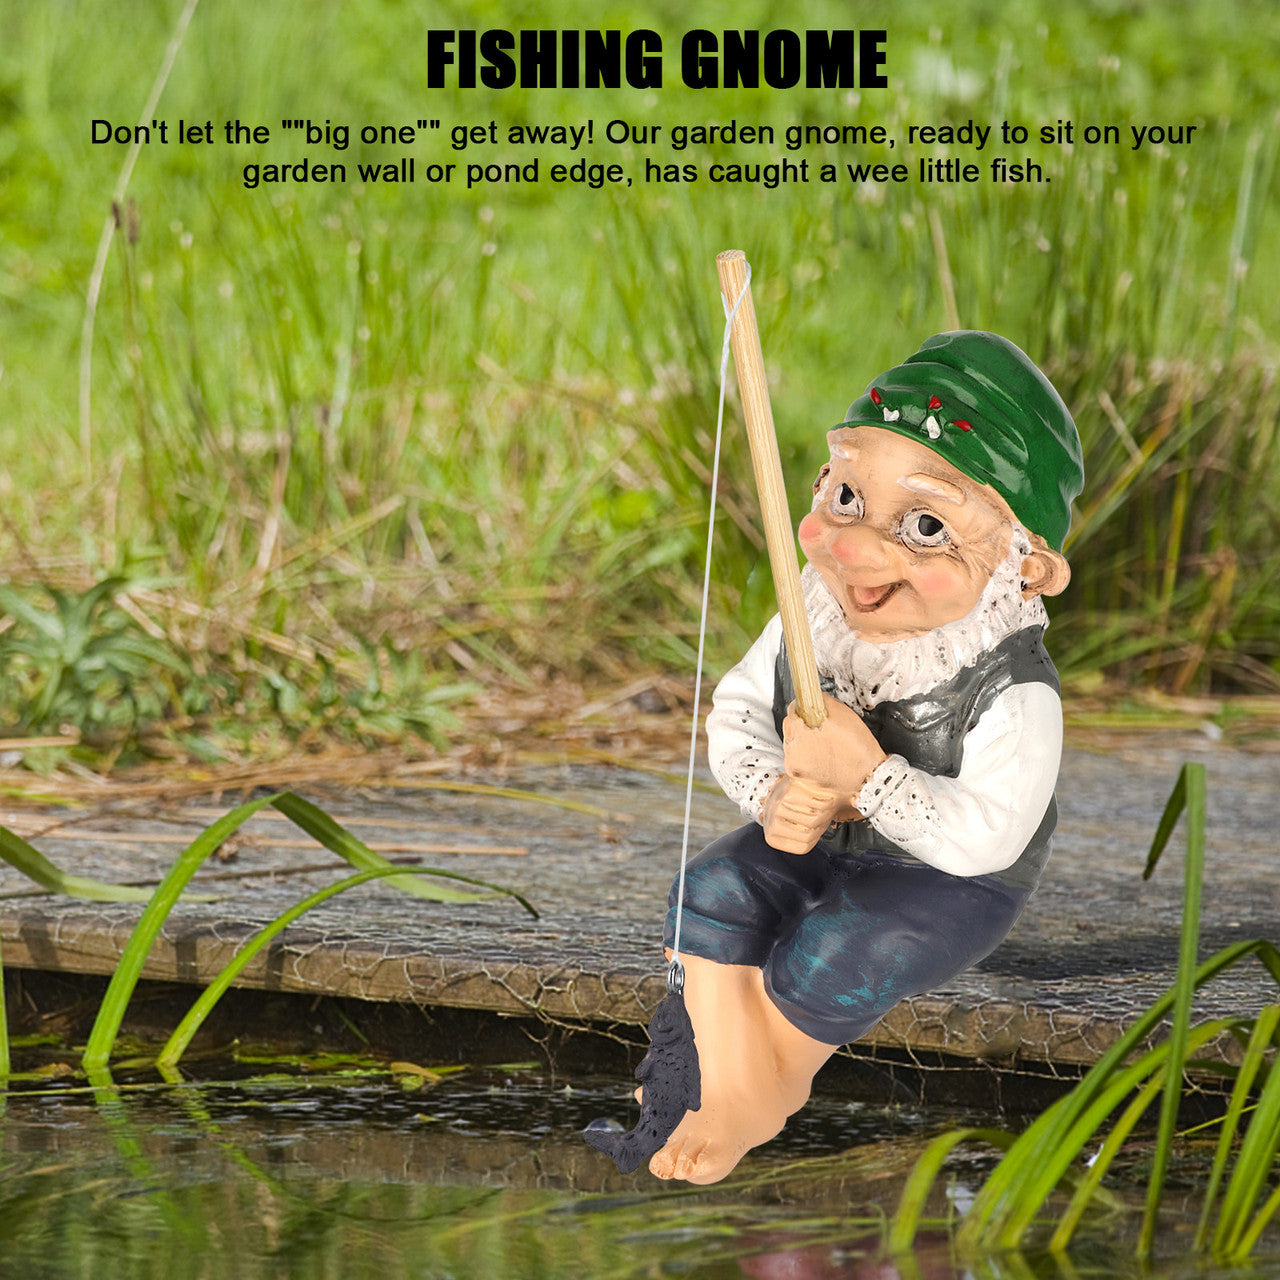 Gone Fishing Gnomes Sitter Funny Resin Figurine Lawn Garden Gnome Statues Home Outdoor Decoration